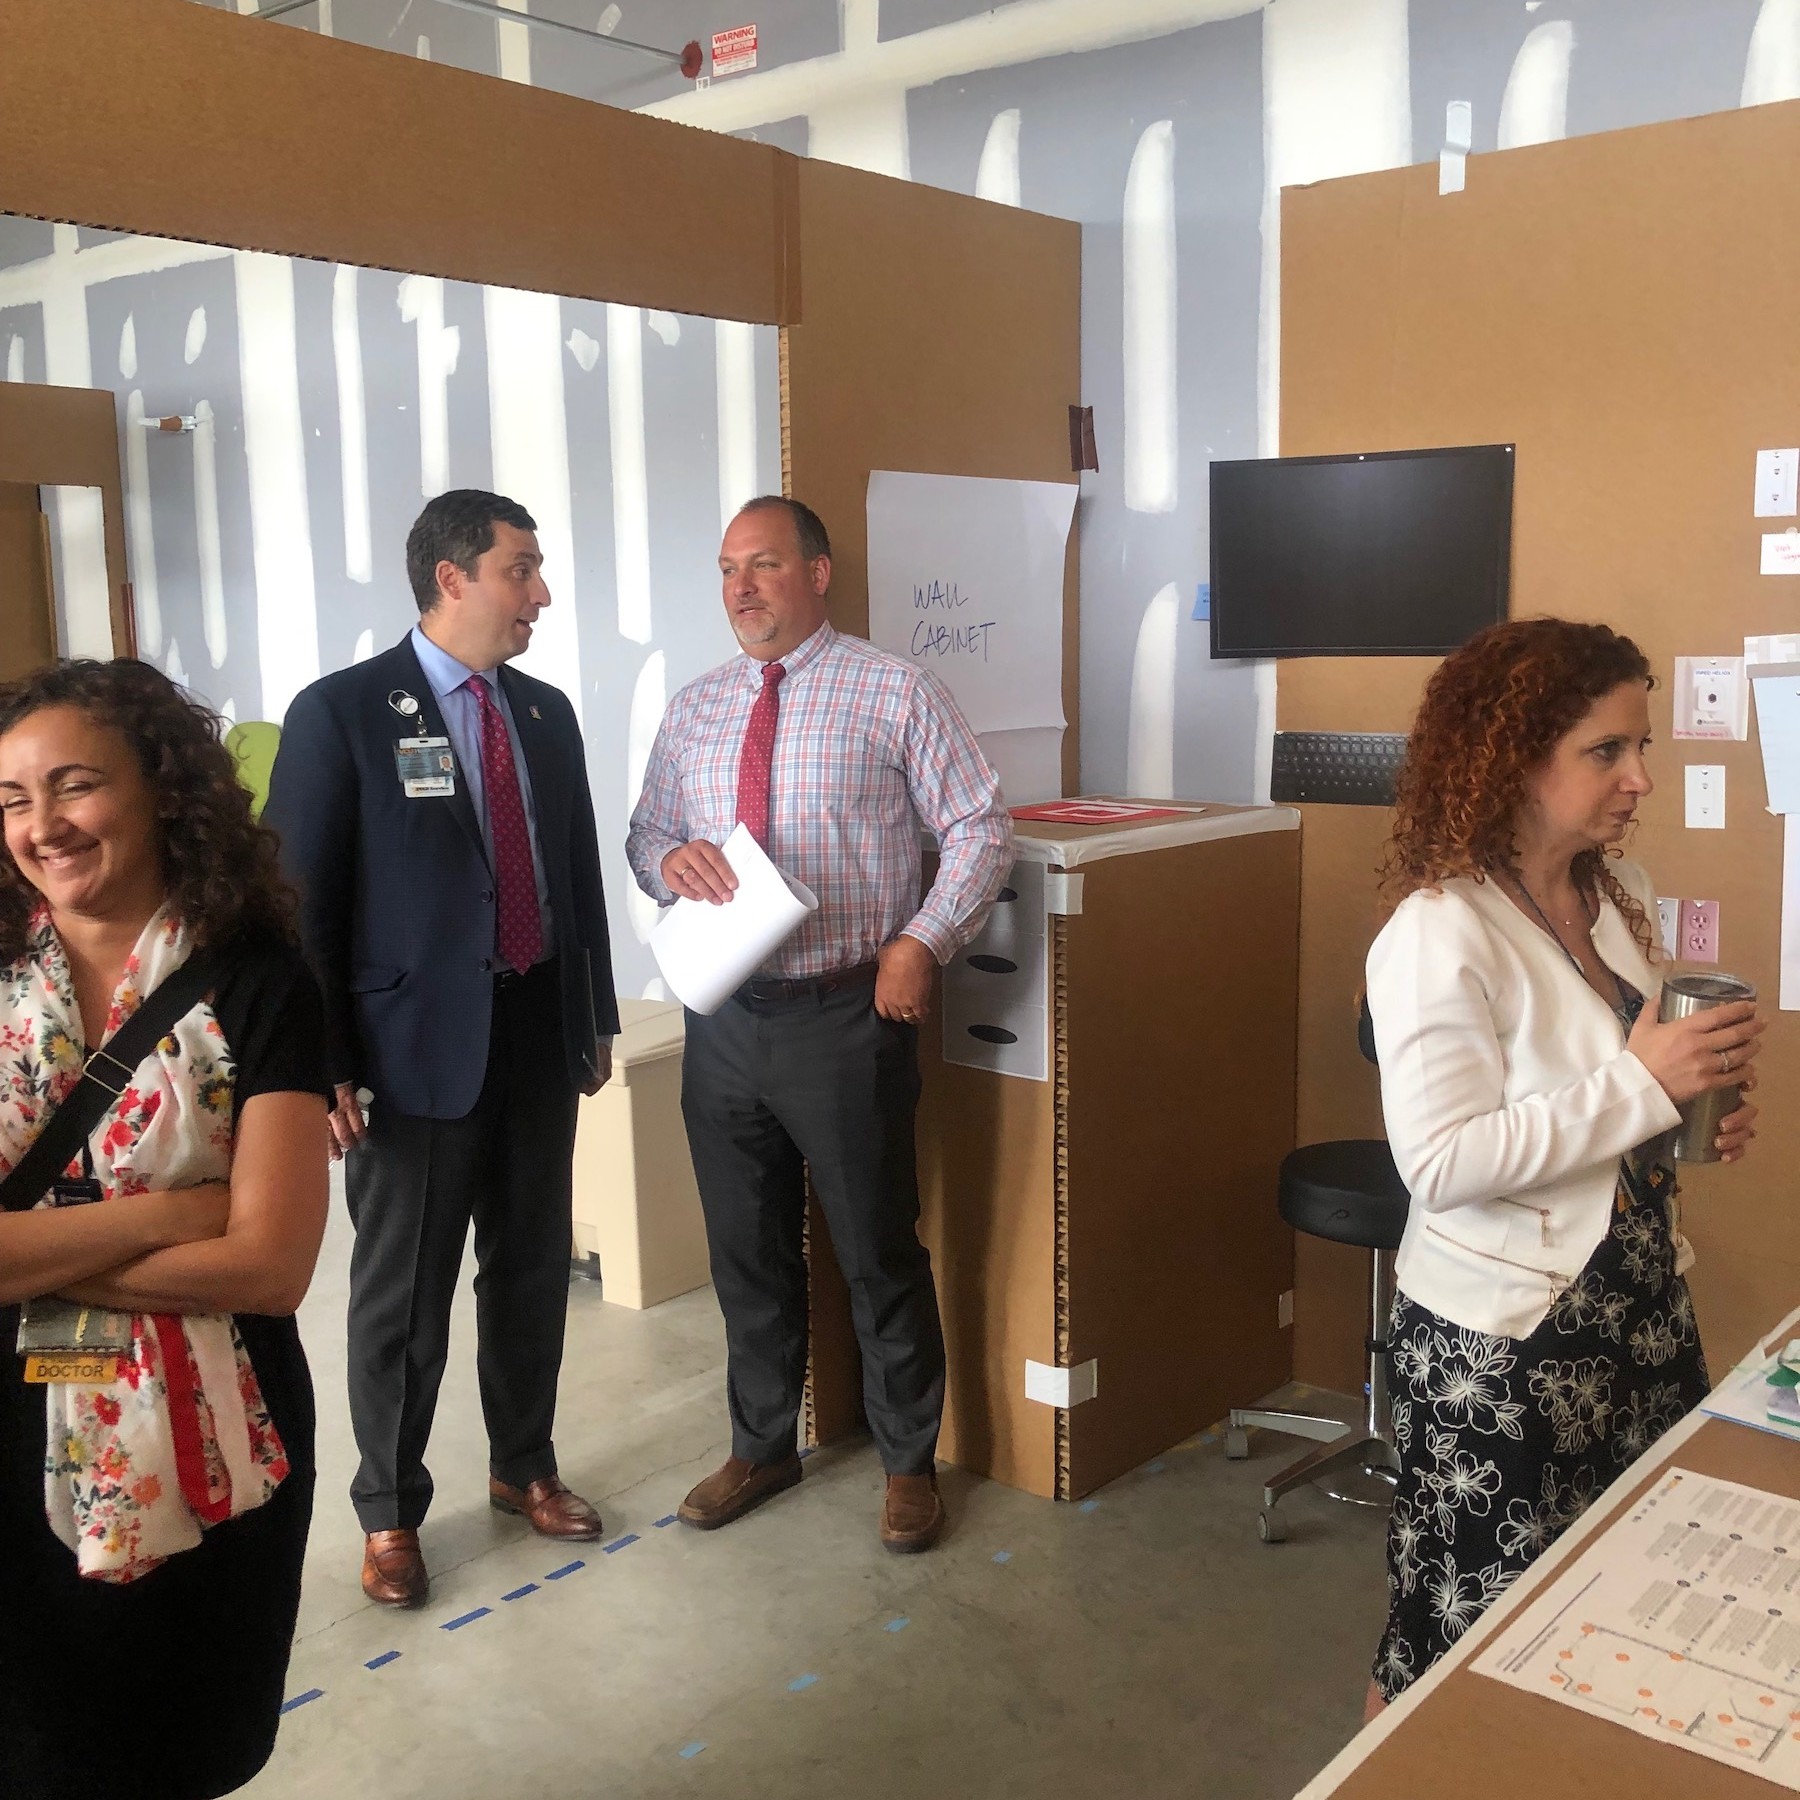 Connors Heroes staff took a tour of new inpatient hospital